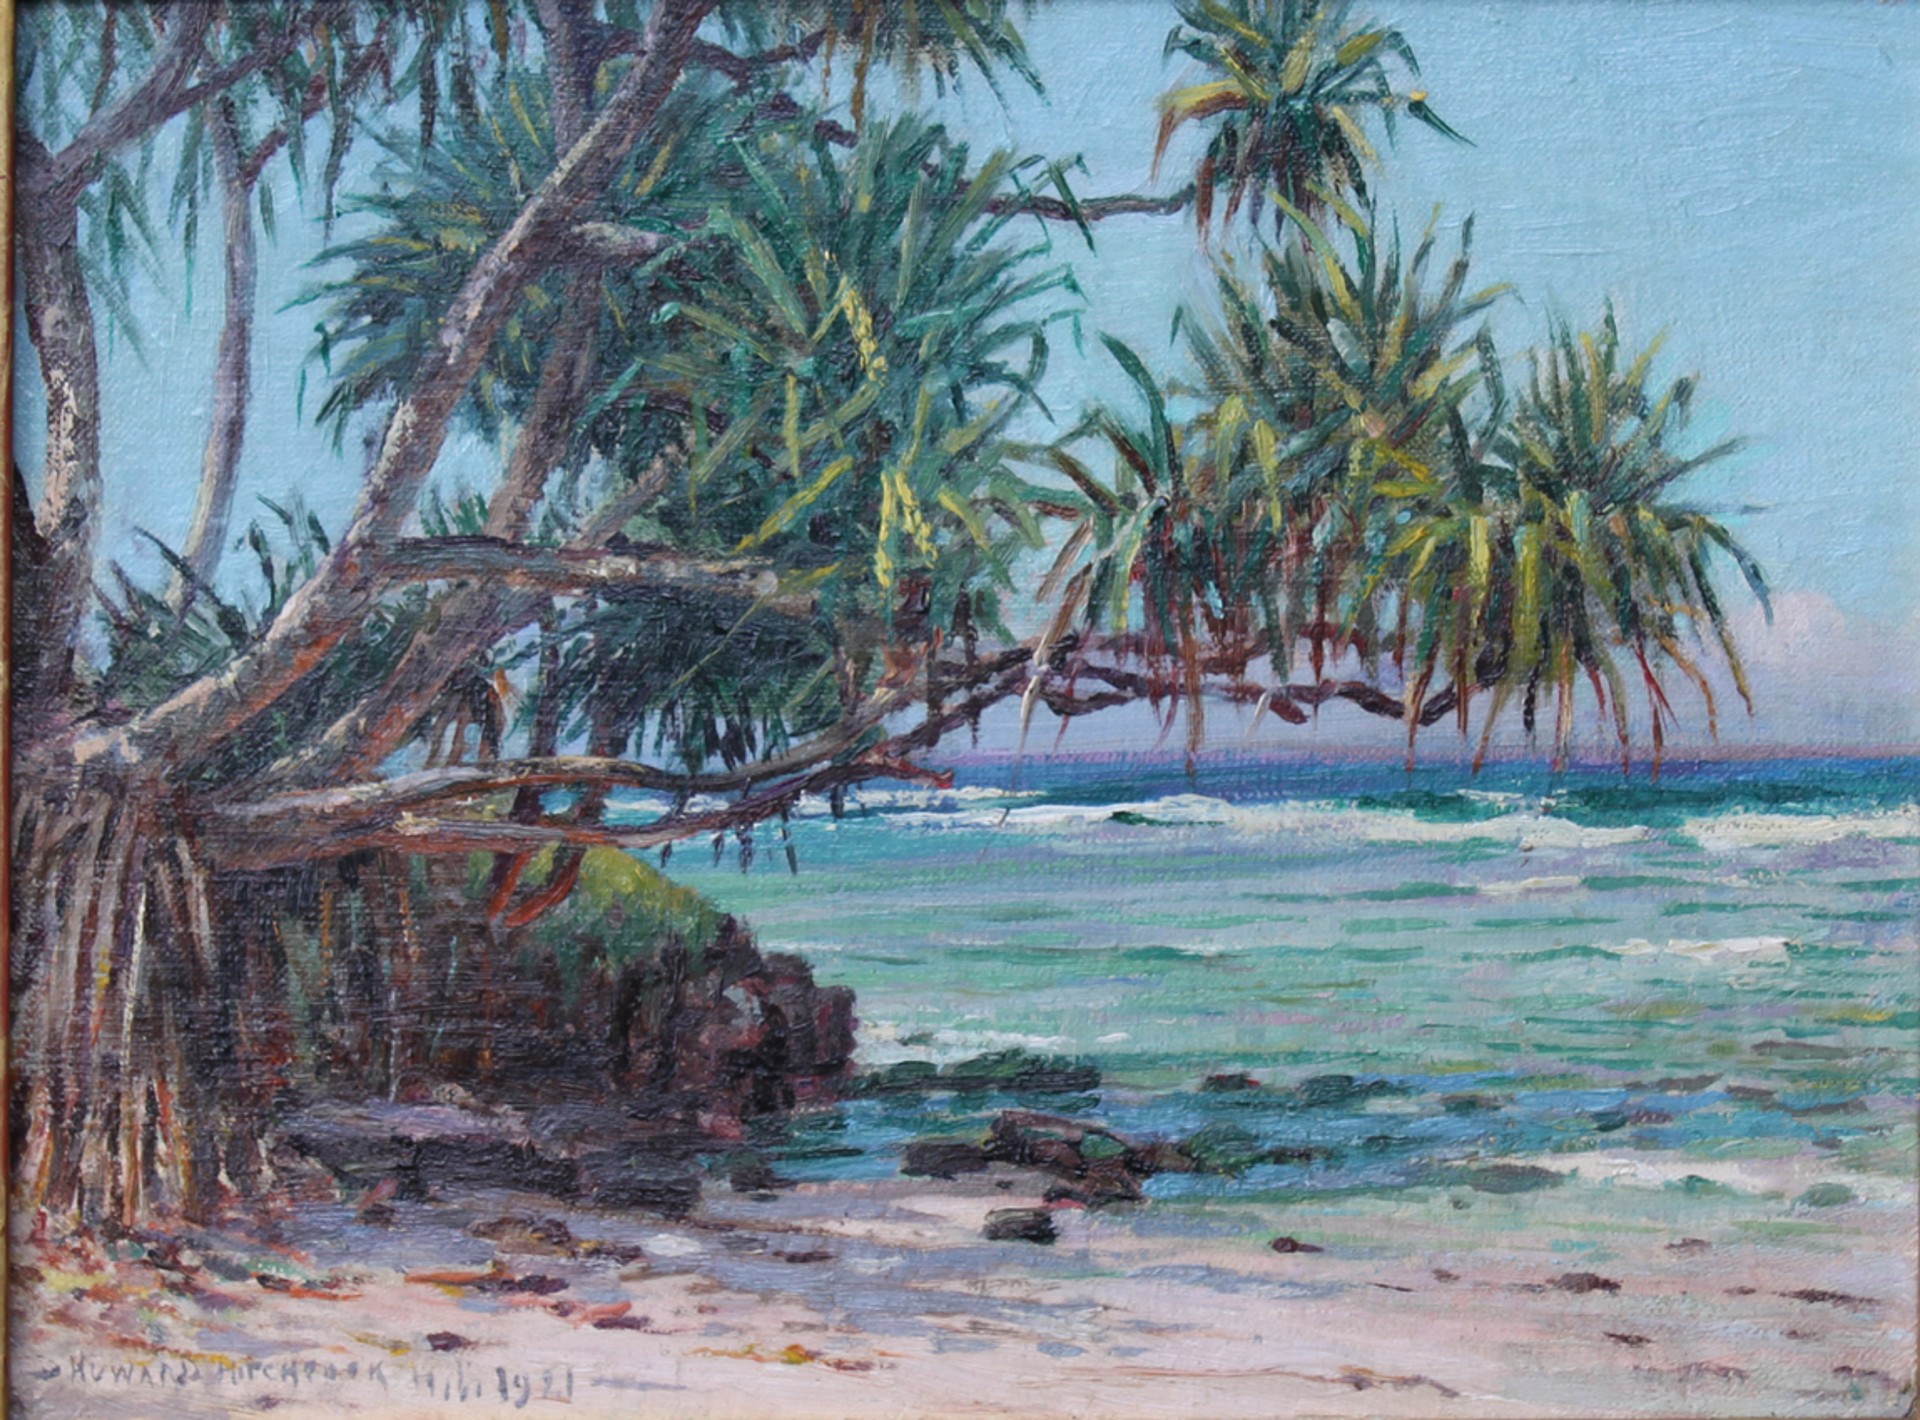 Lauhala by the Shore by D. Howard Hitchcock